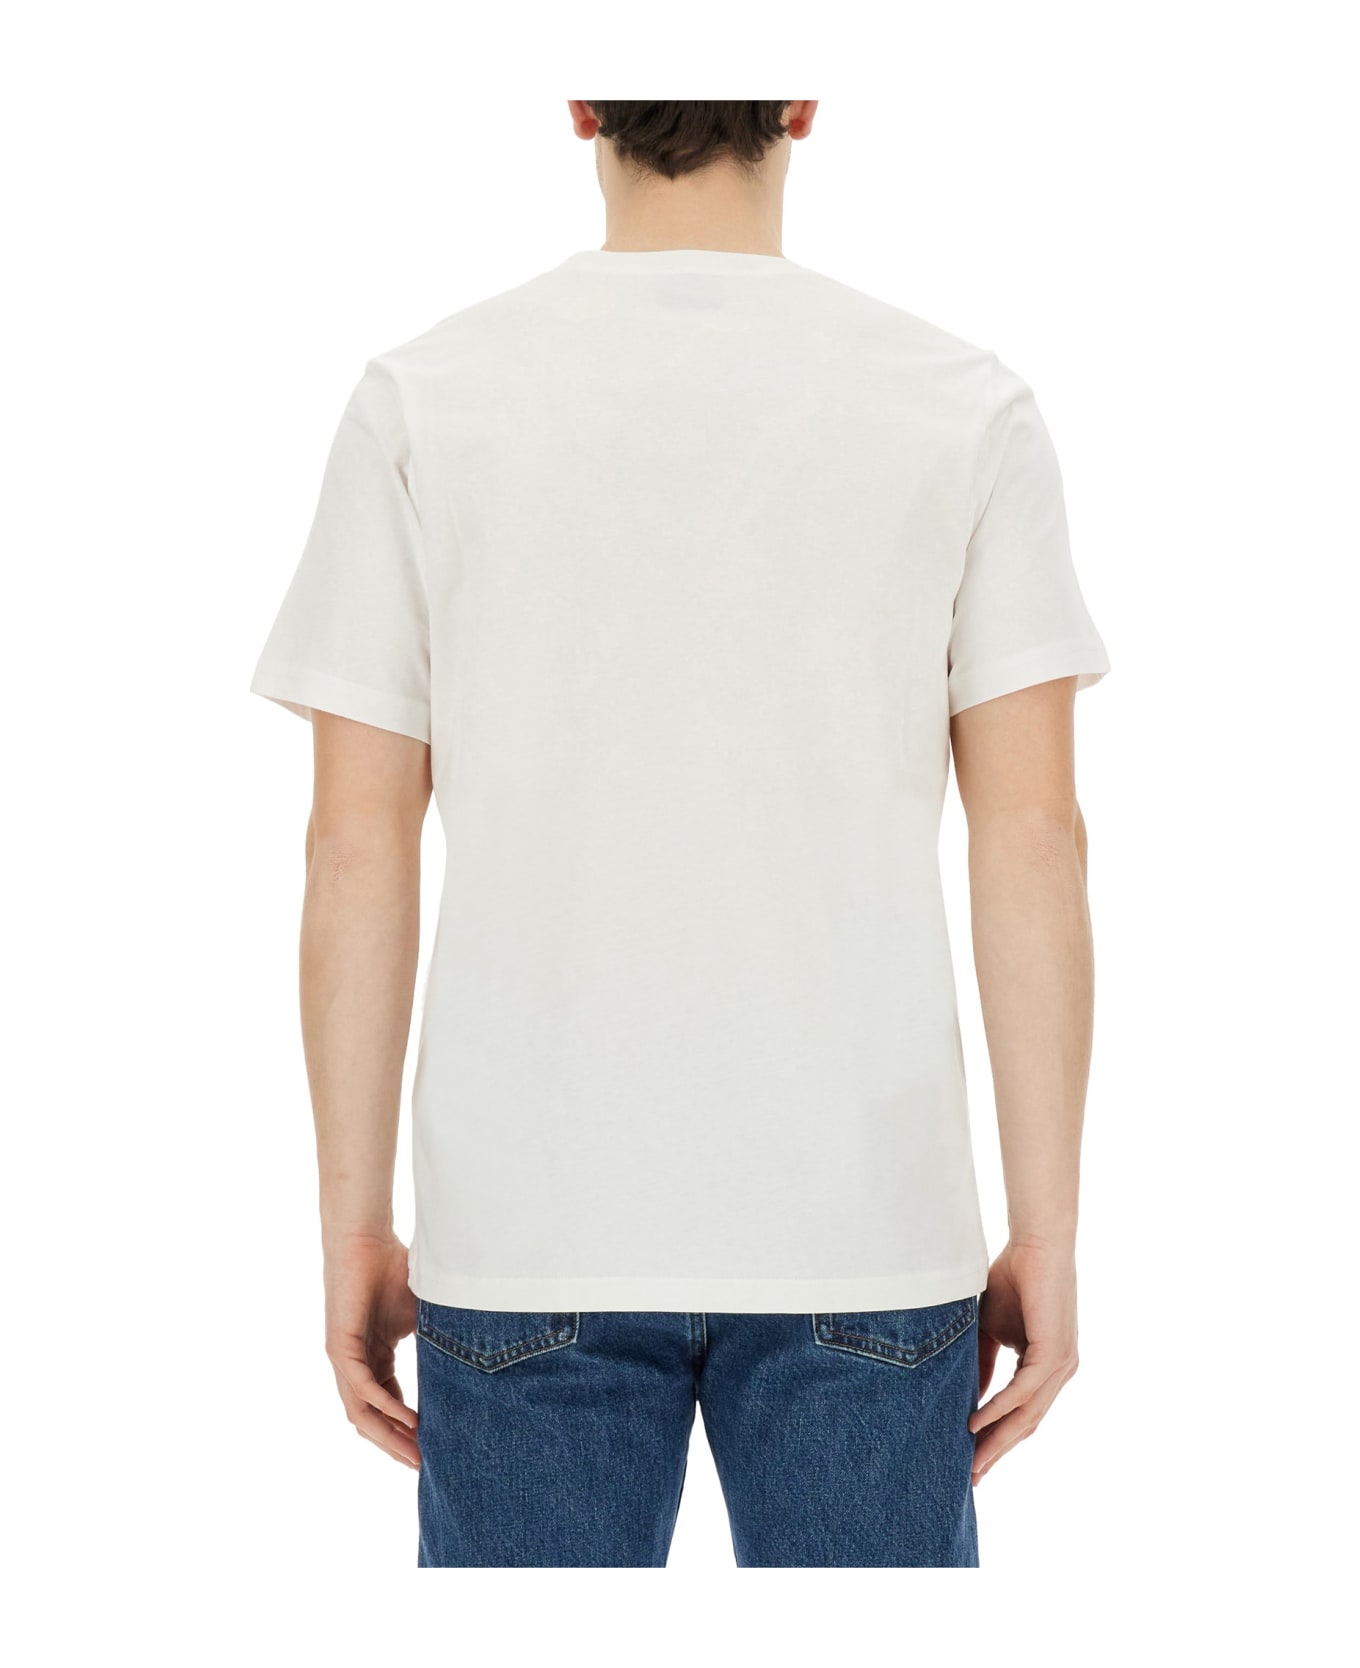 PS by Paul Smith Teddy T-shirt - WHITE シャツ